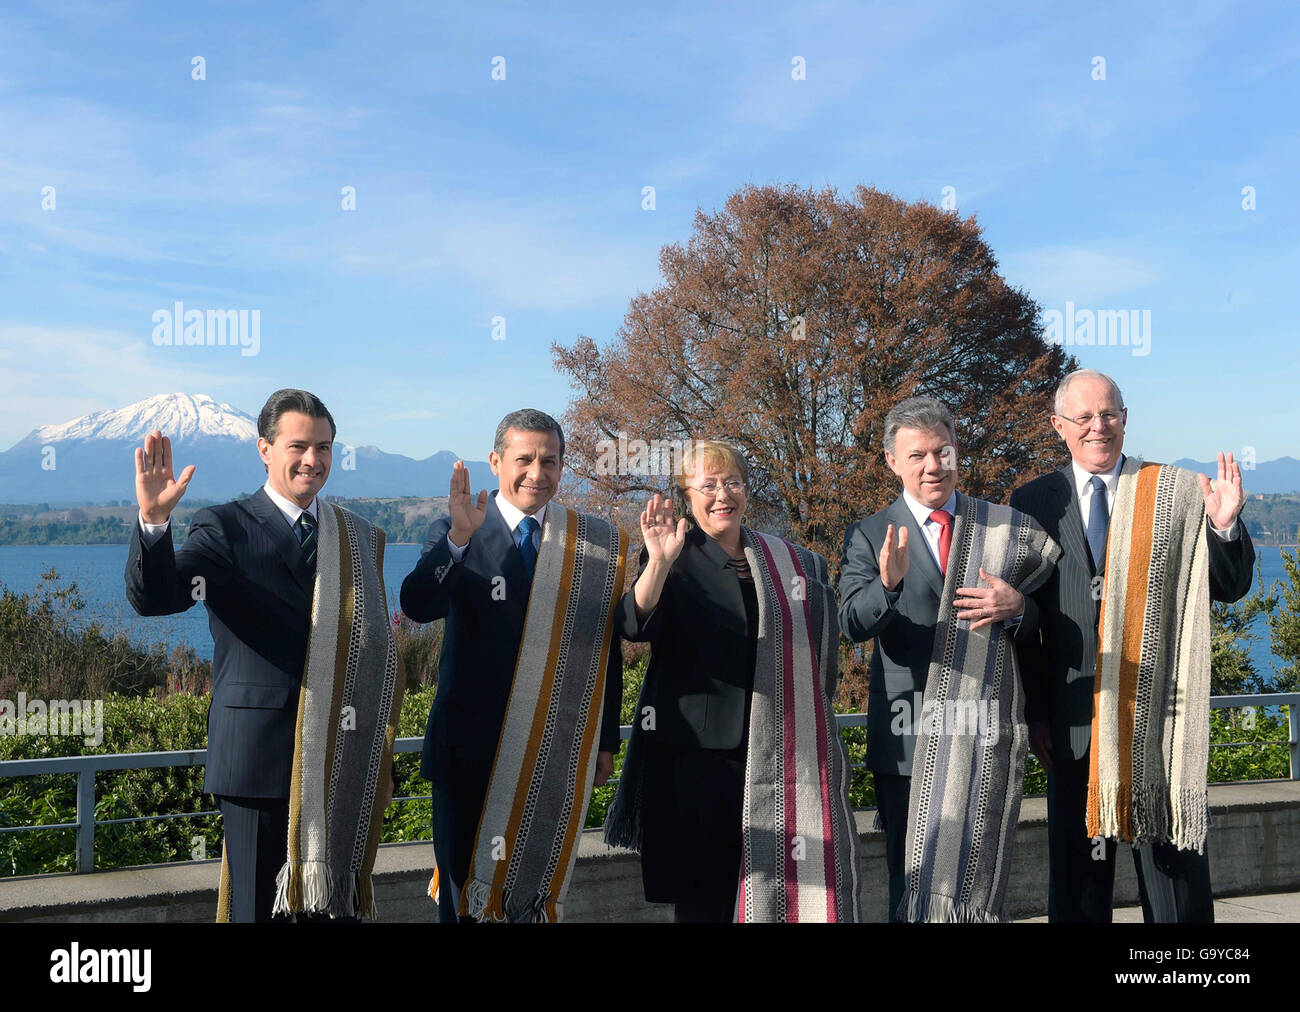 The leaders of the Pacific Alliance wave during a group photo during the 11th Presidential Summit of the Pacific Alliance July 1, 2016 in Puerto Varas, Chile. Leaders include L-R: Mexican President Enrique Pena Nieto, Peru President Ollanta Humala, Chilean President Michelle Bachelet, Colombian President Juan Manuel Santos and Peruvian president-elect Pedro Pablo Kuczynski. Stock Photo